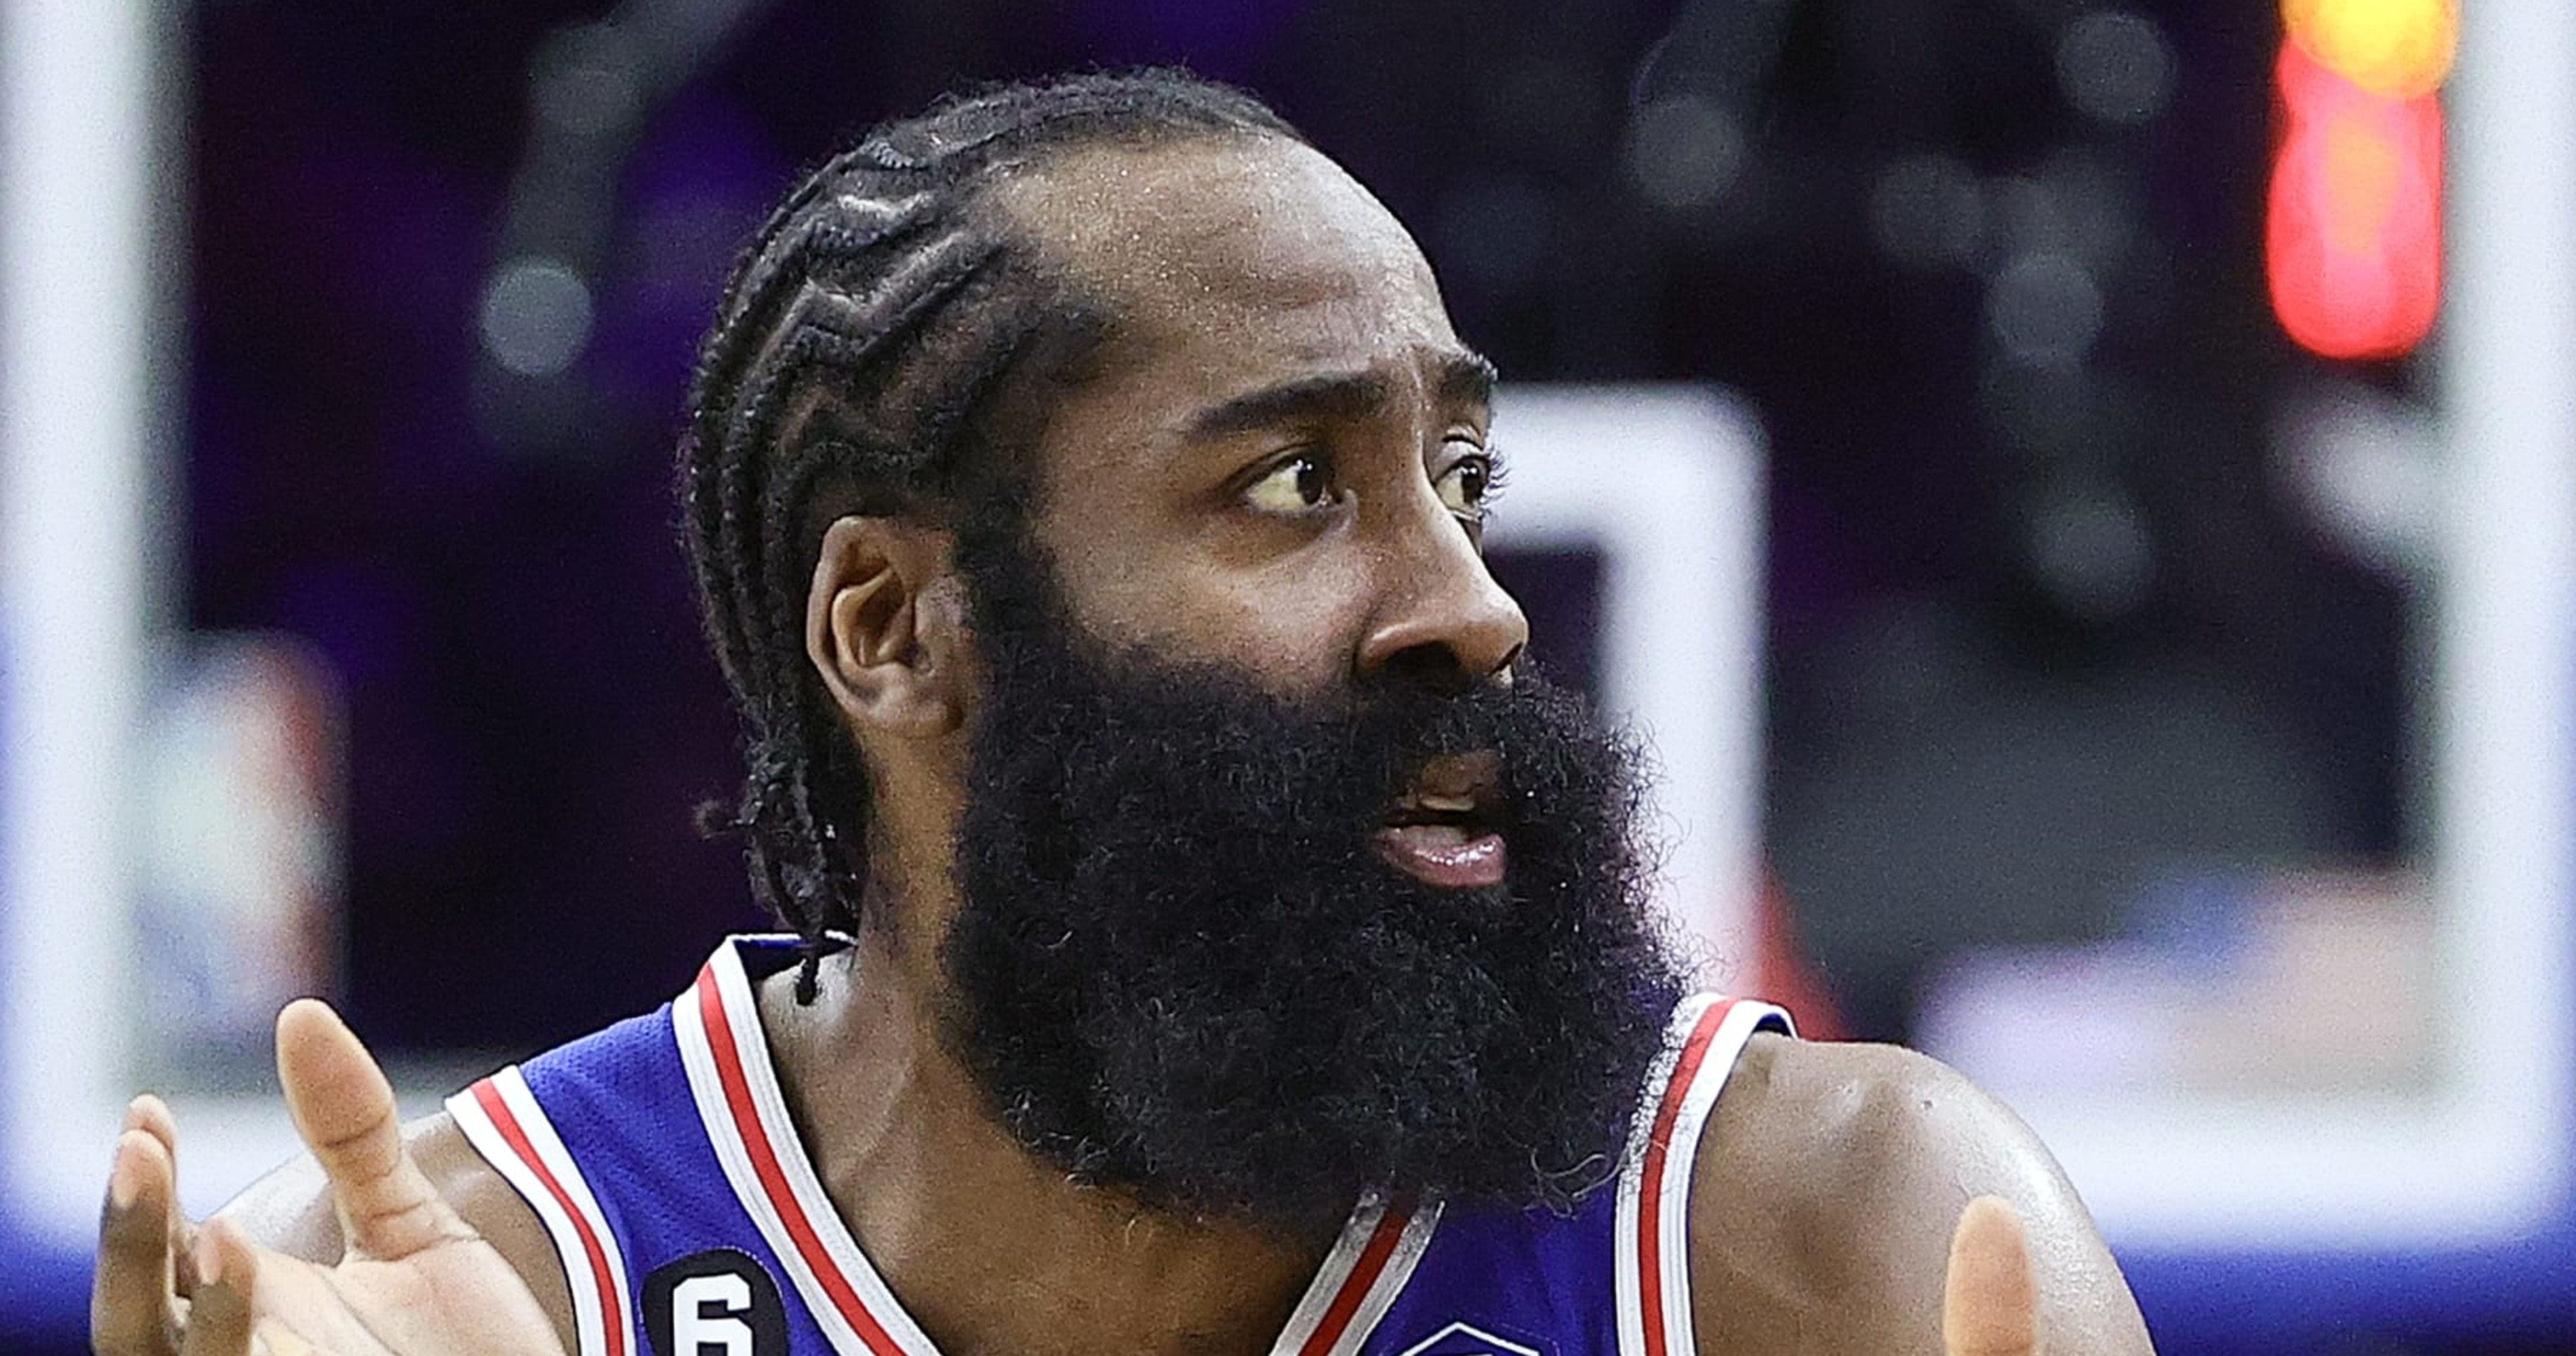 Philadelphia 76ers star James Harden slammed by NBA fans for 'cookie  monster' outfit ahead of playoffs series opener